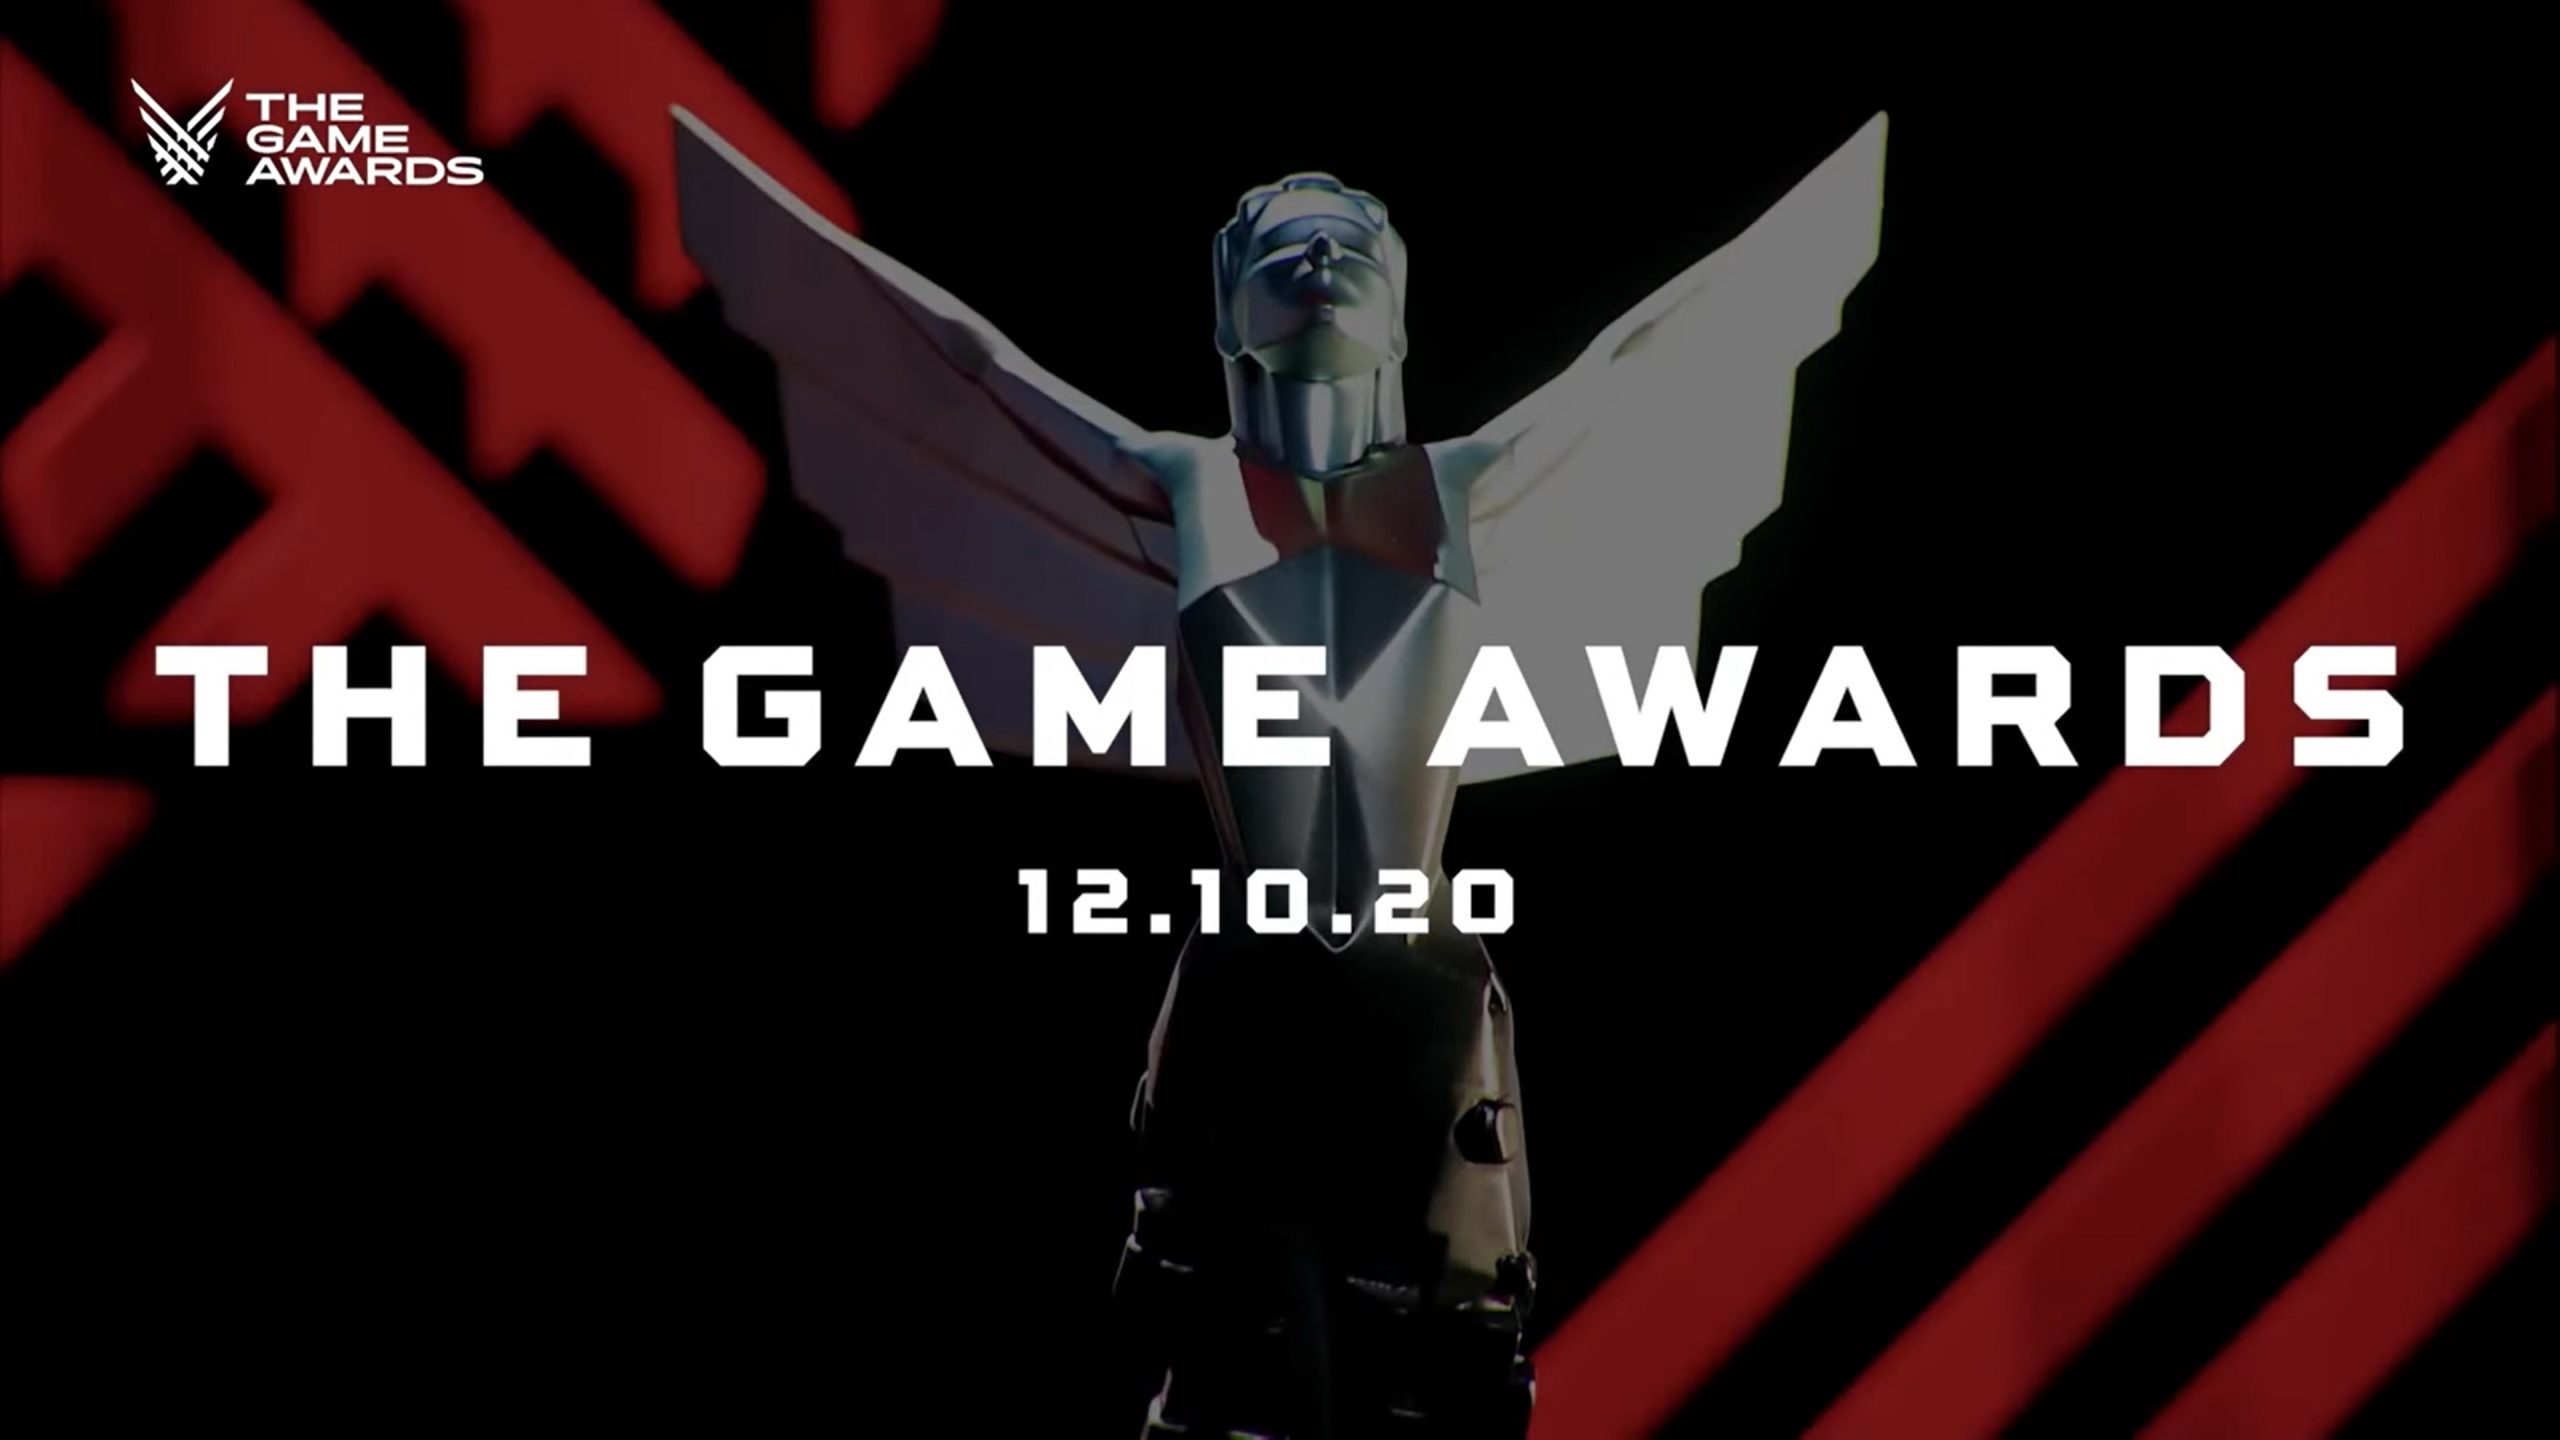 Global Game Awards 2020 Results: Game of the Year - Best Indie